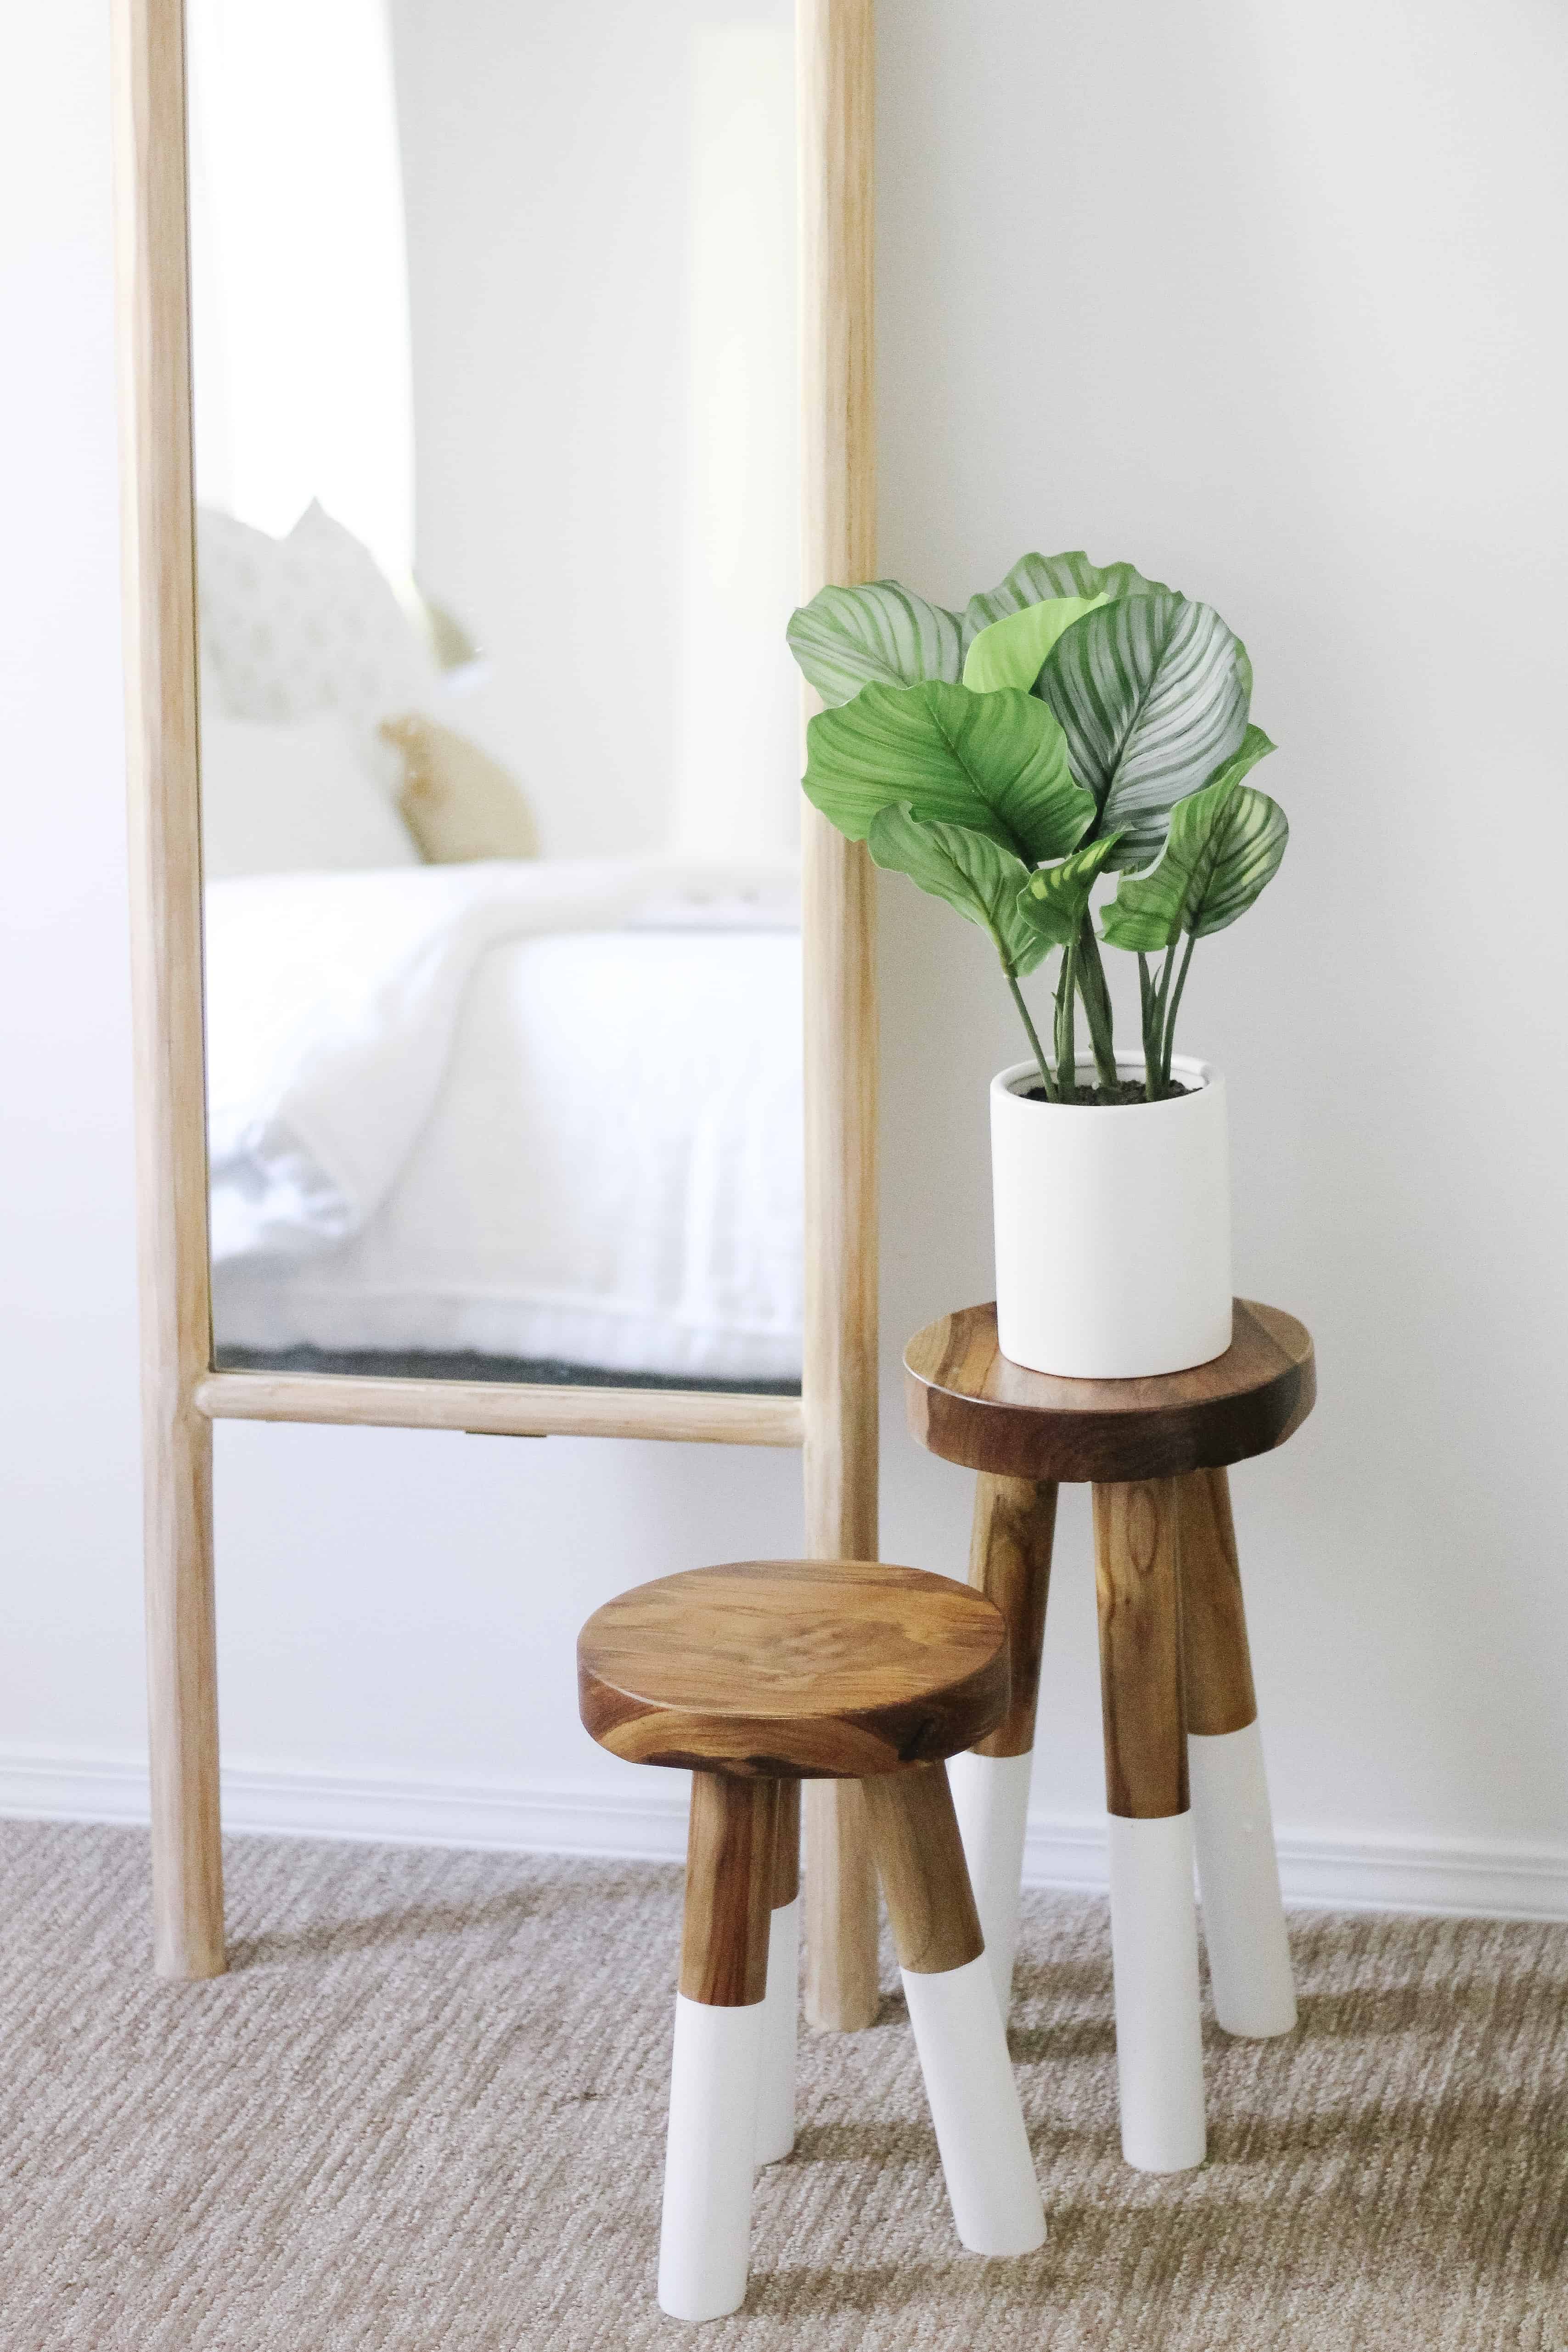 Serena and Lily Dipped stools and Teak Ladder Mirror